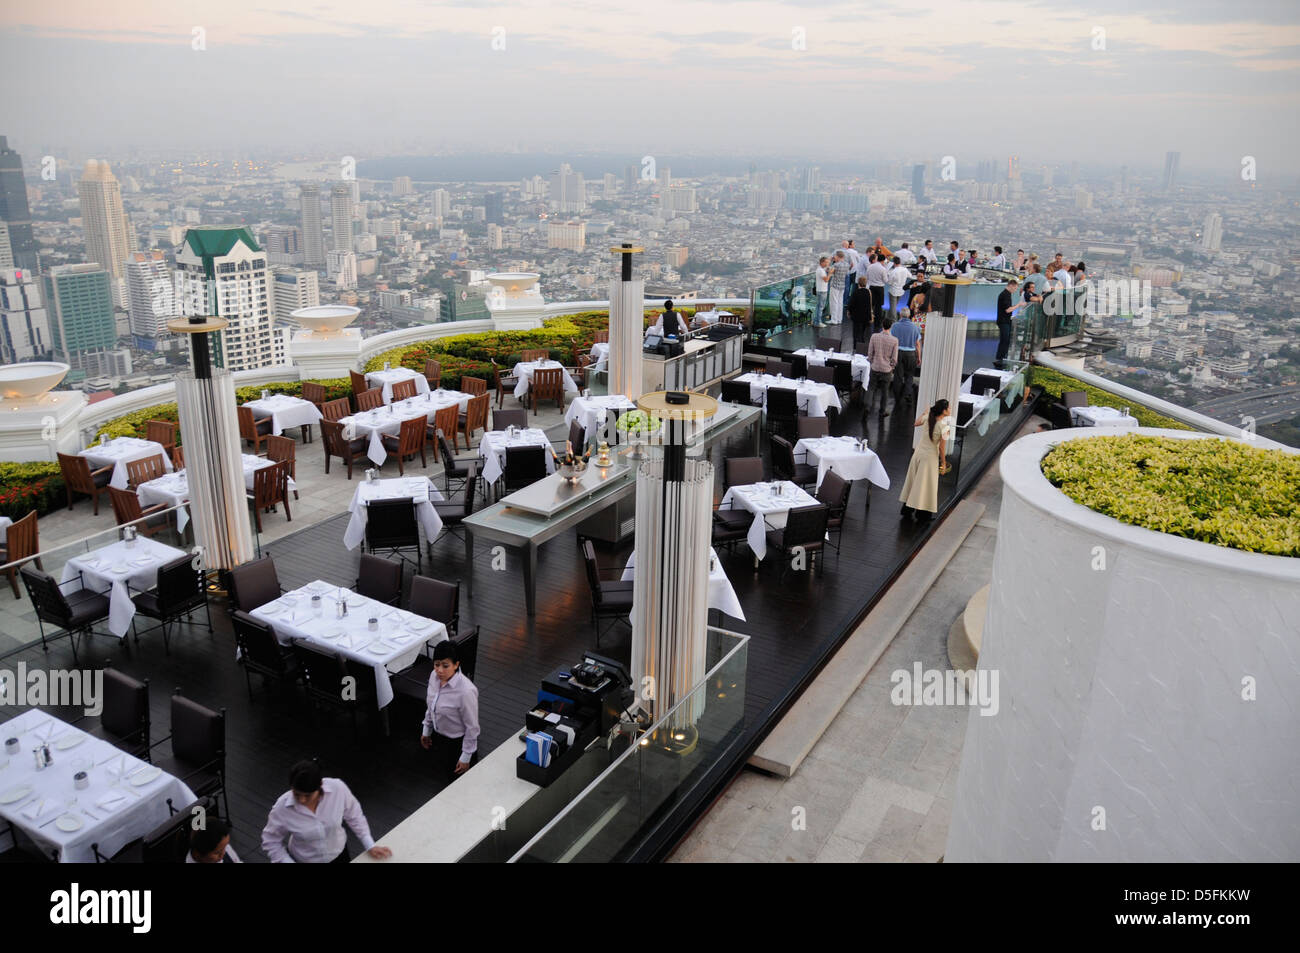 Sirocco bar and restaurant, state tower Stock Photo